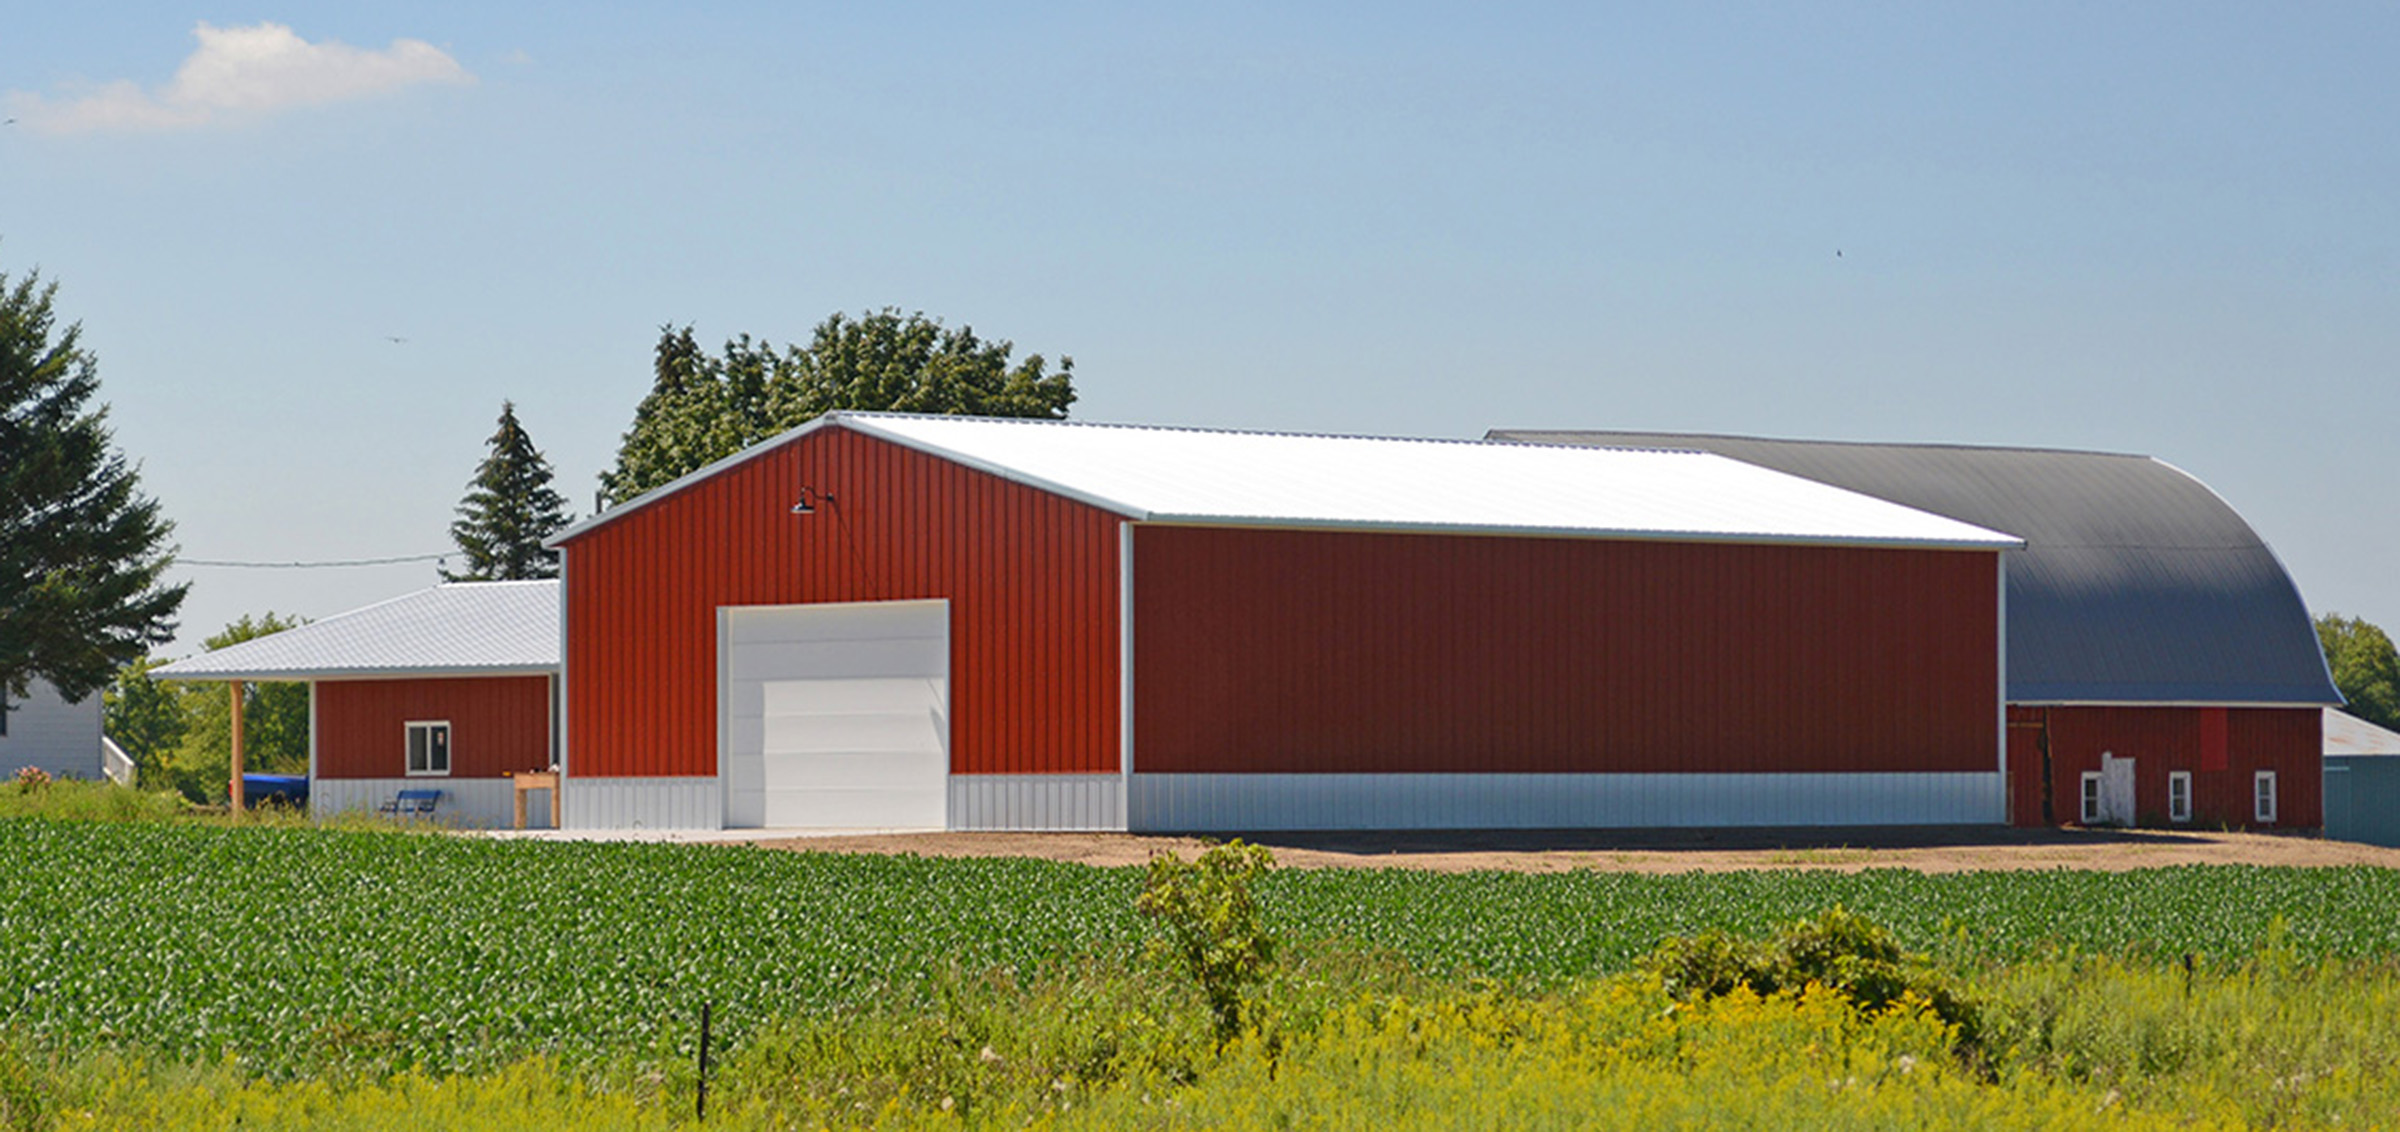 red and white post frame agricultural building and barn